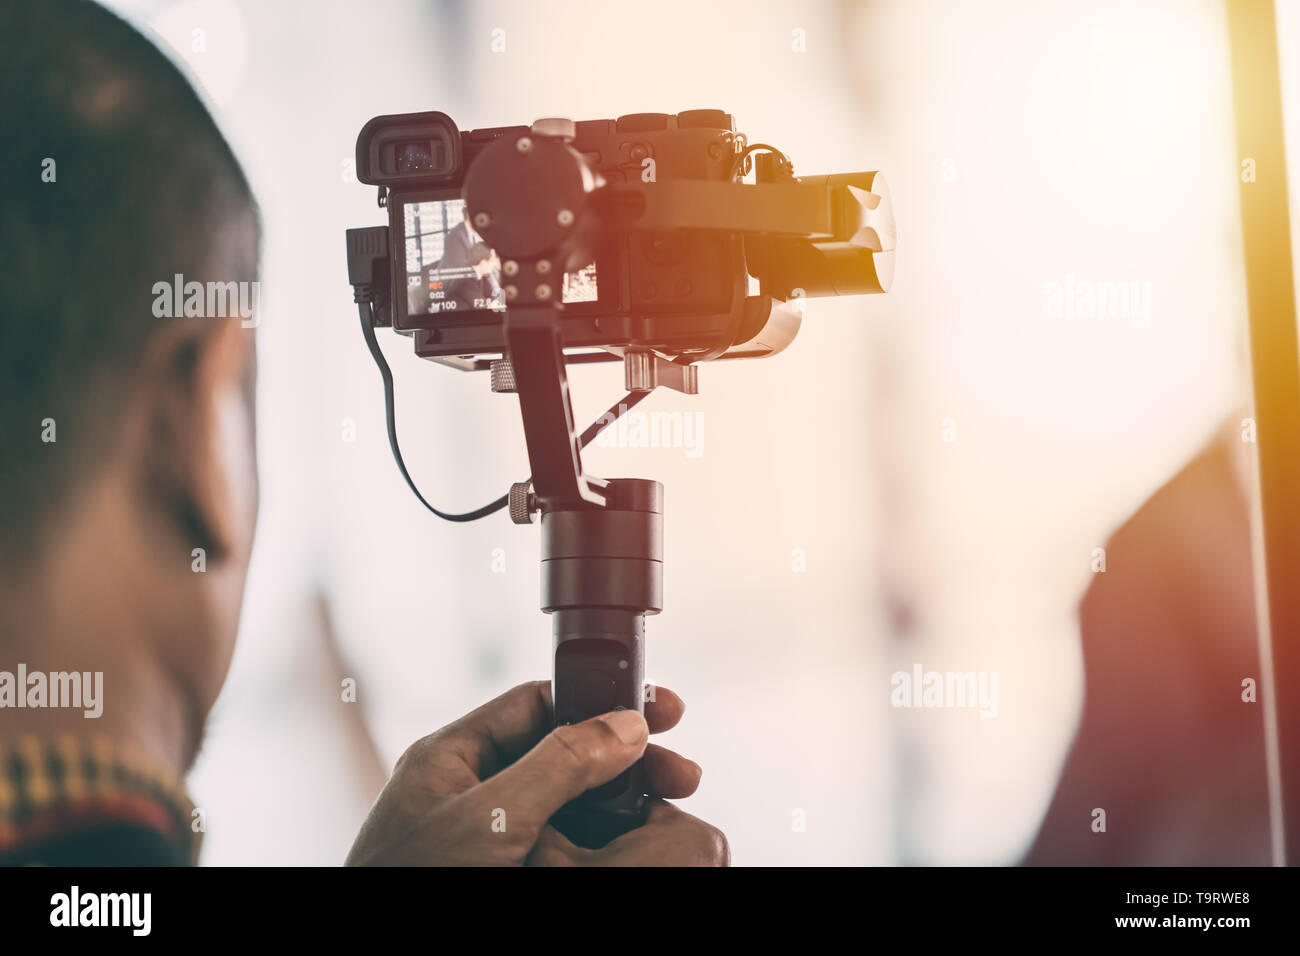 Videographer recording video with mirrorless digital camera on Gimbal Stabilization system Stock Photo